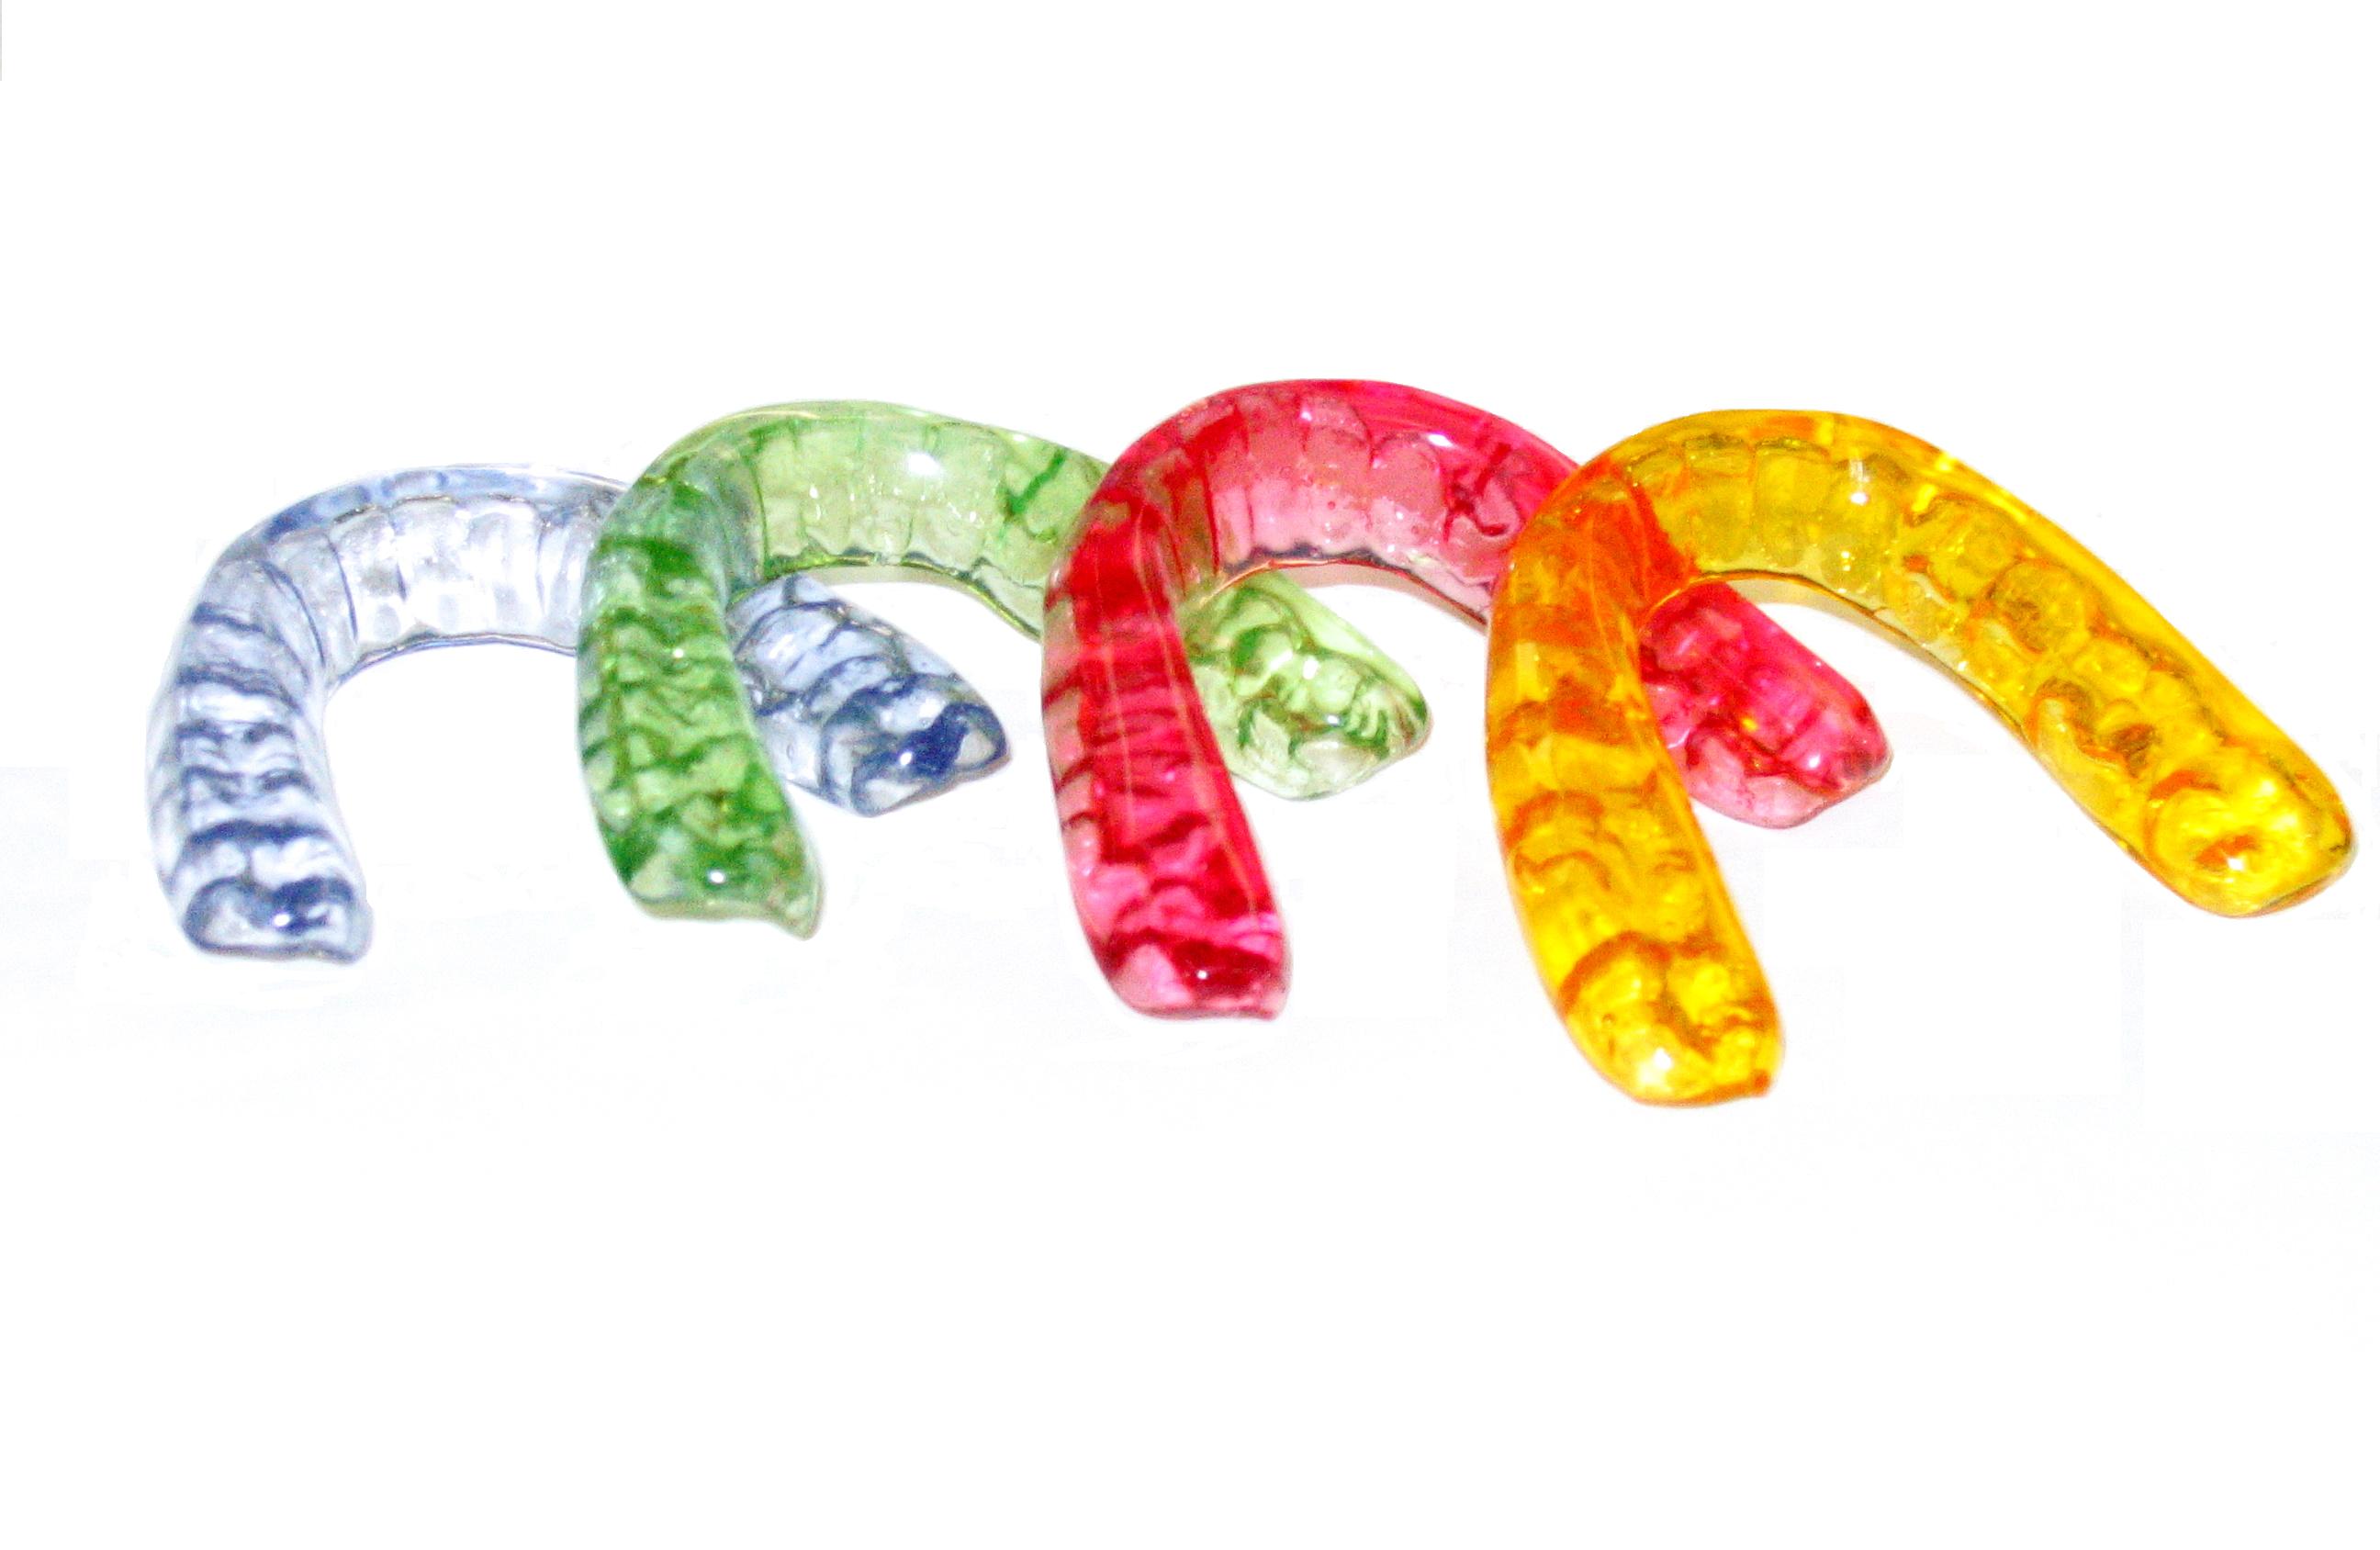 Mouth guards can prevent tmj, bruxism and grinding teeth while you sleep.